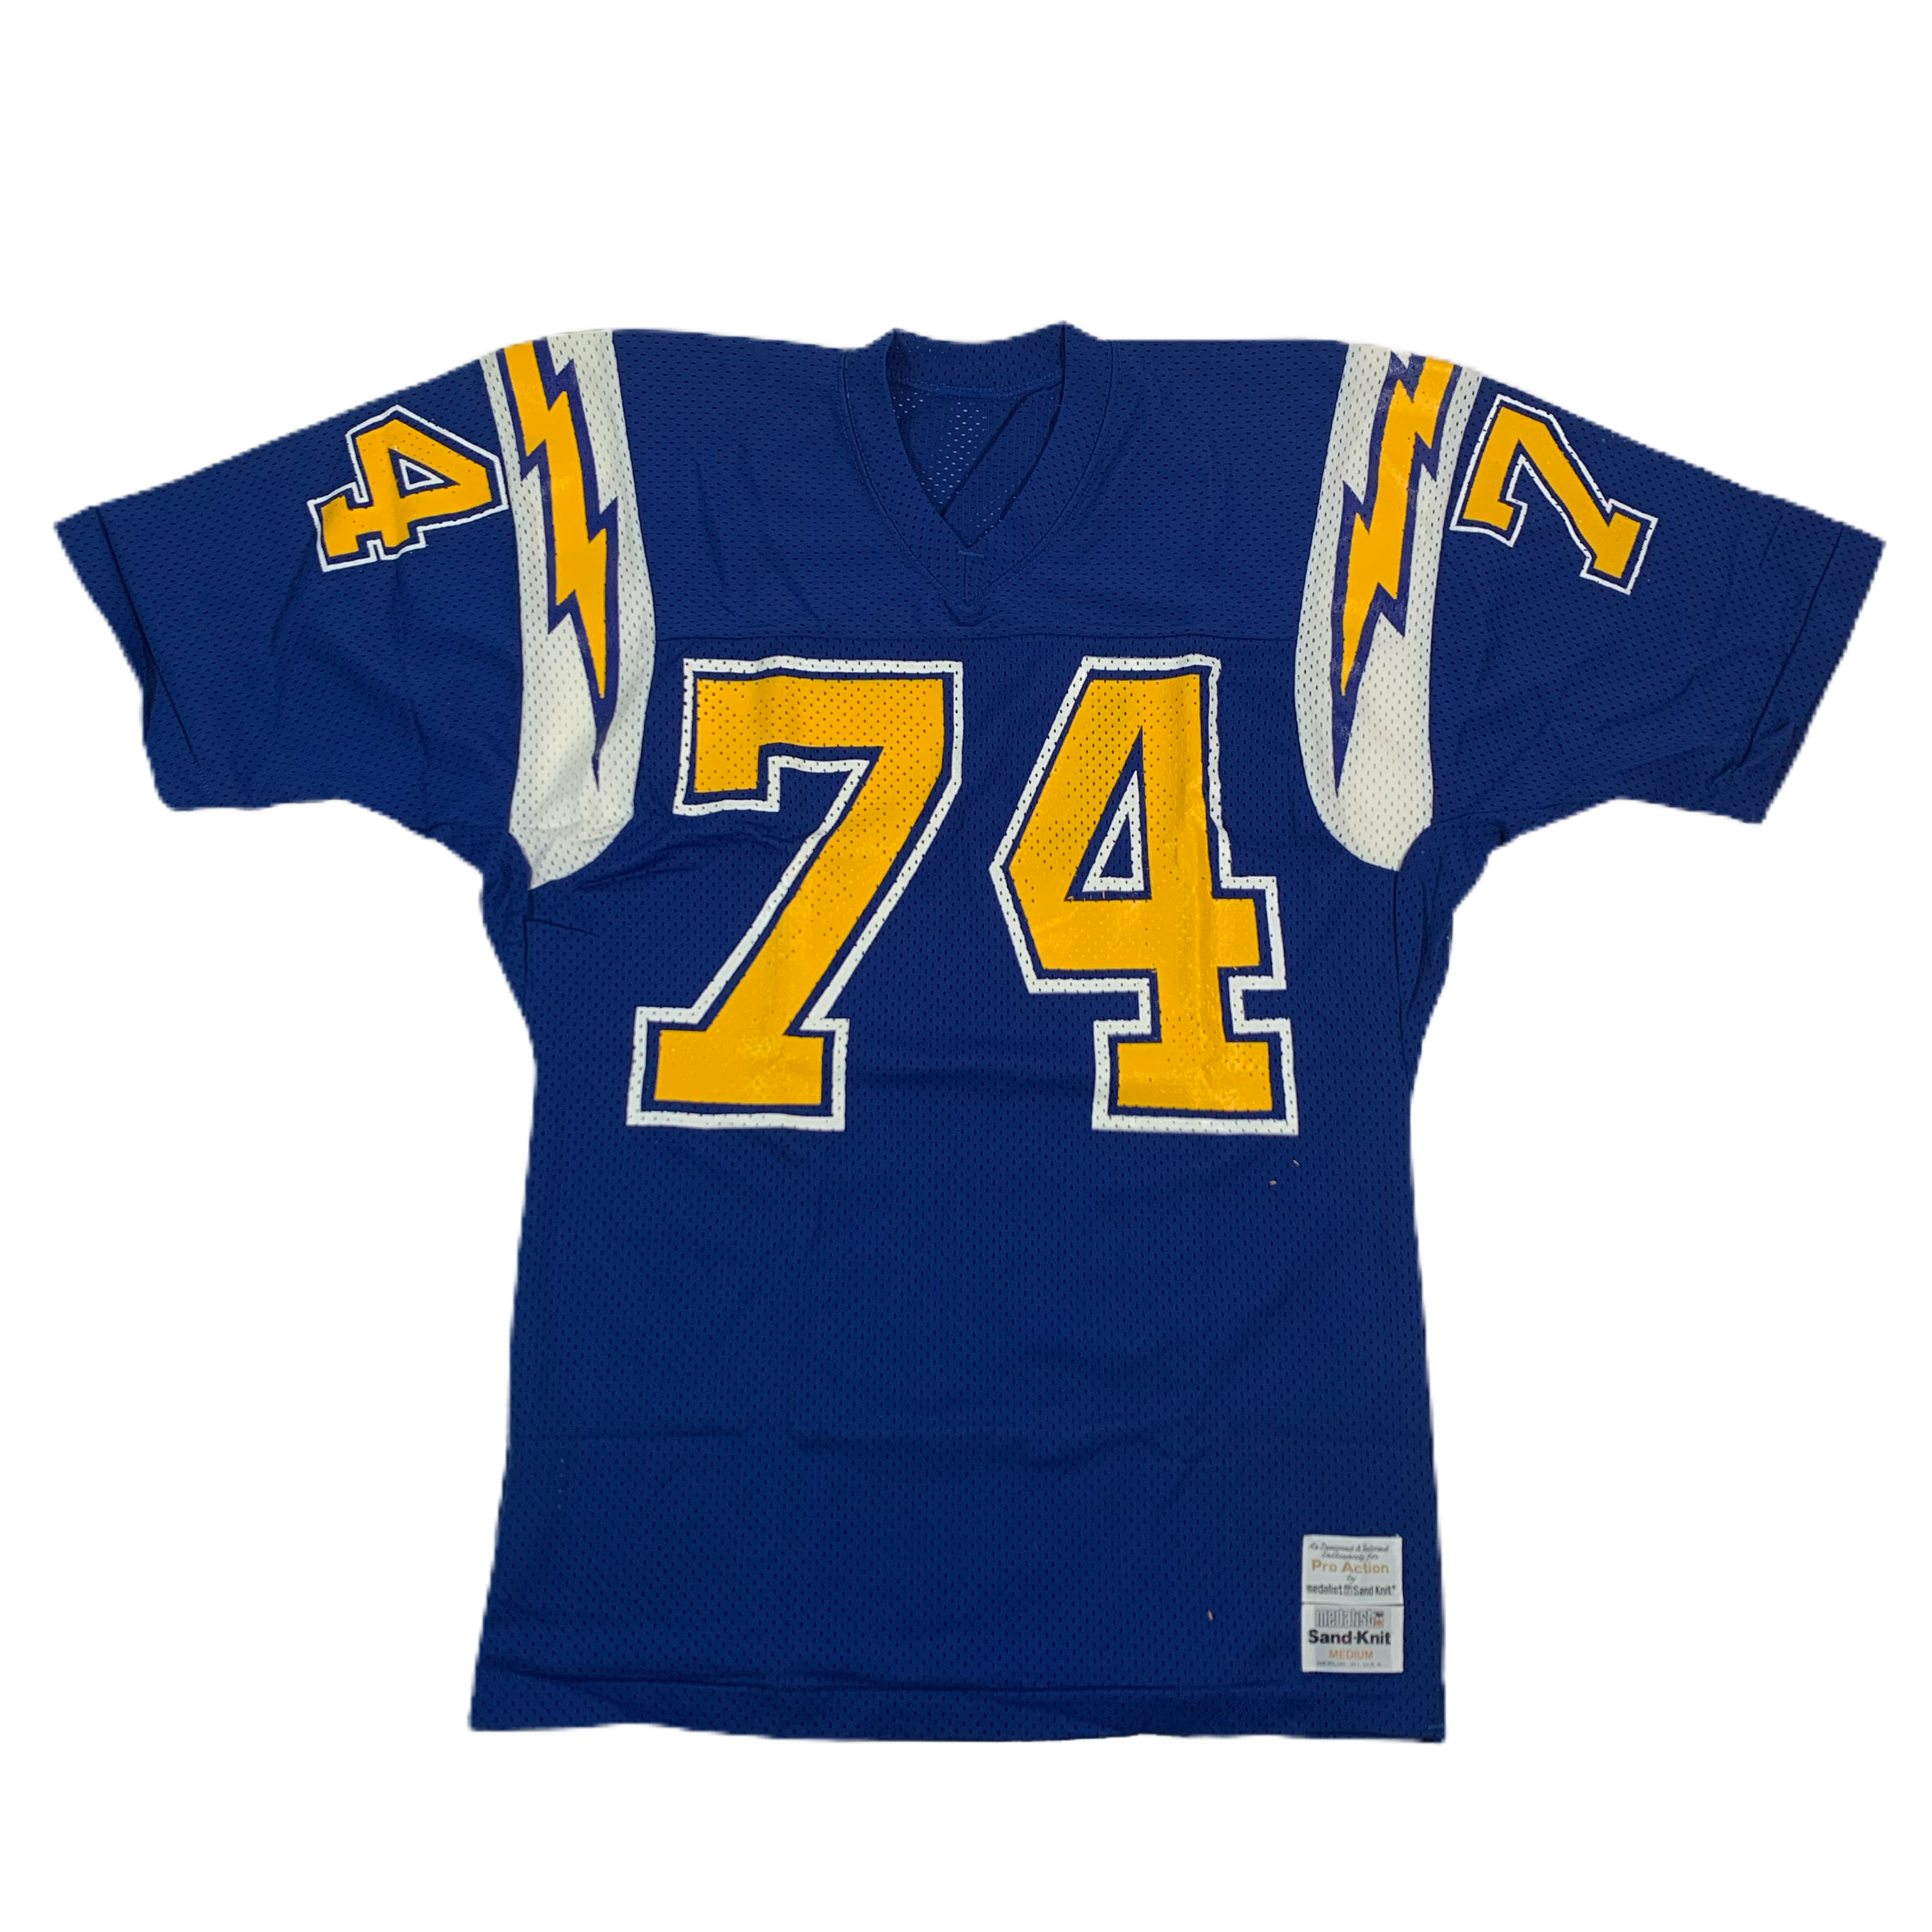 Vintage Sand Knit Deacon Jones San Diego Chargers Football Jersey